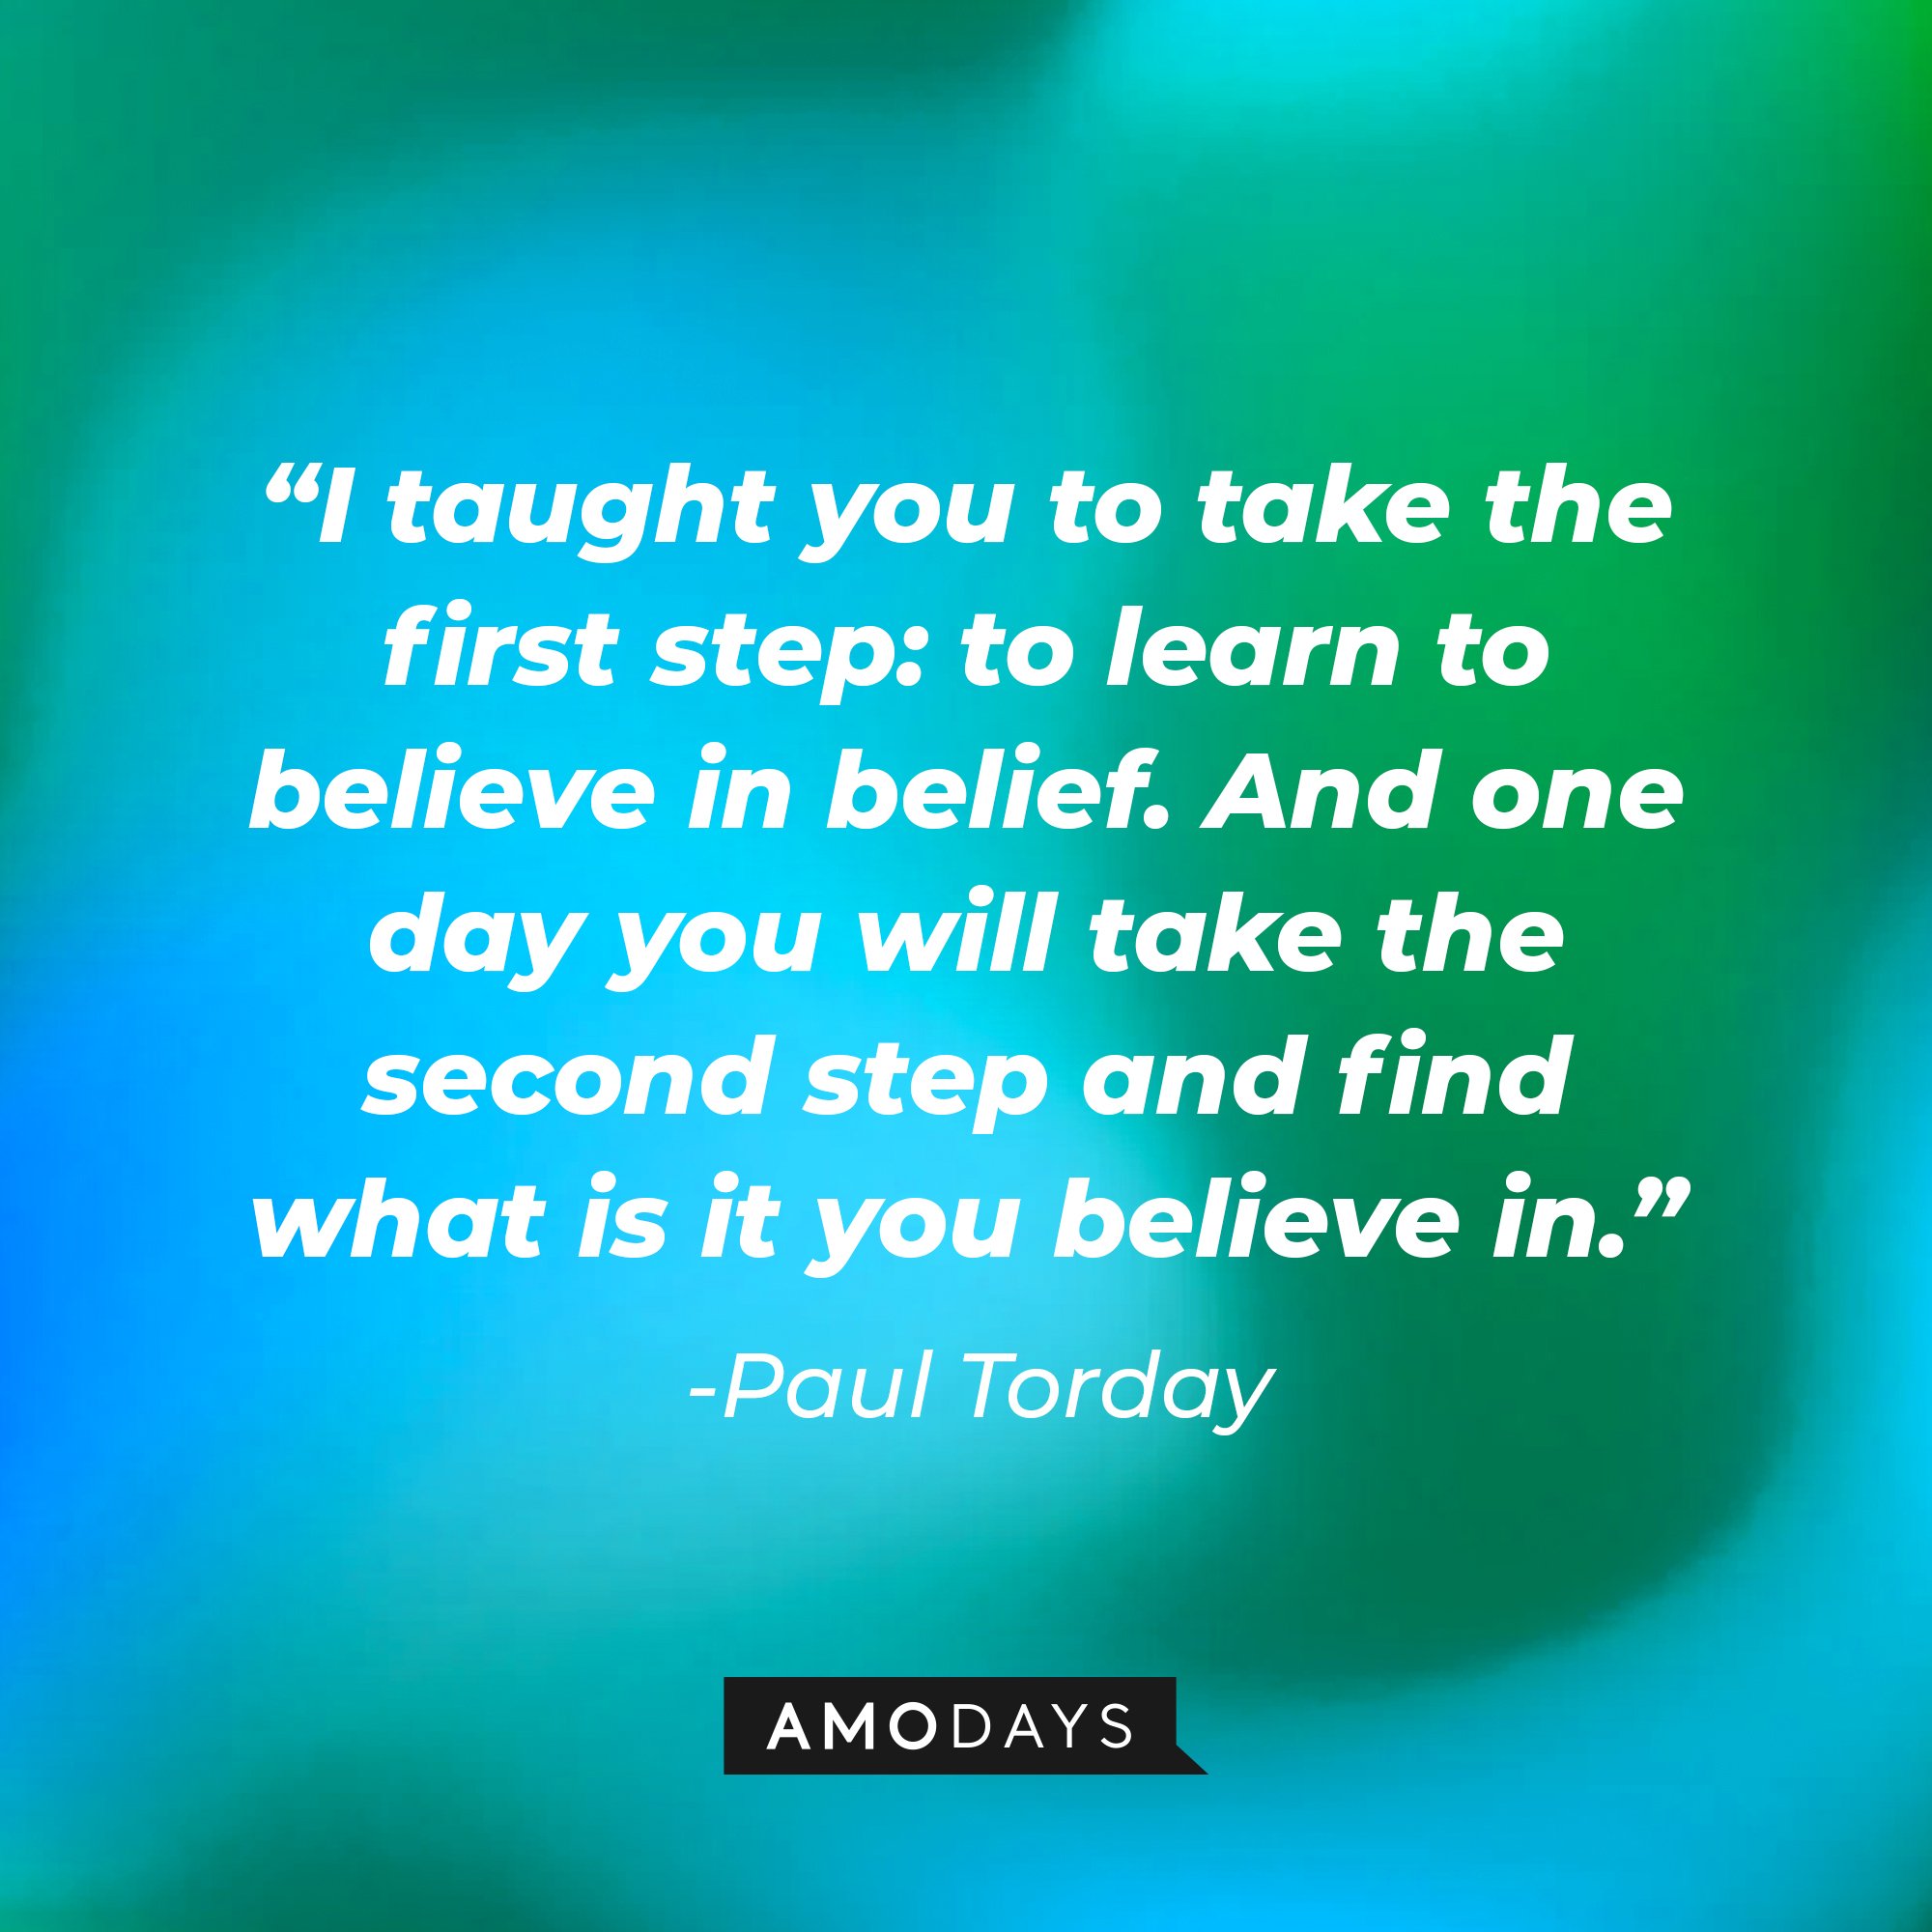 Paul Torday's quote: "I taught you to take the first step: to learn to believe in belief. And one day you will take the second step and find what is it you believe in." | Image: AmoDays